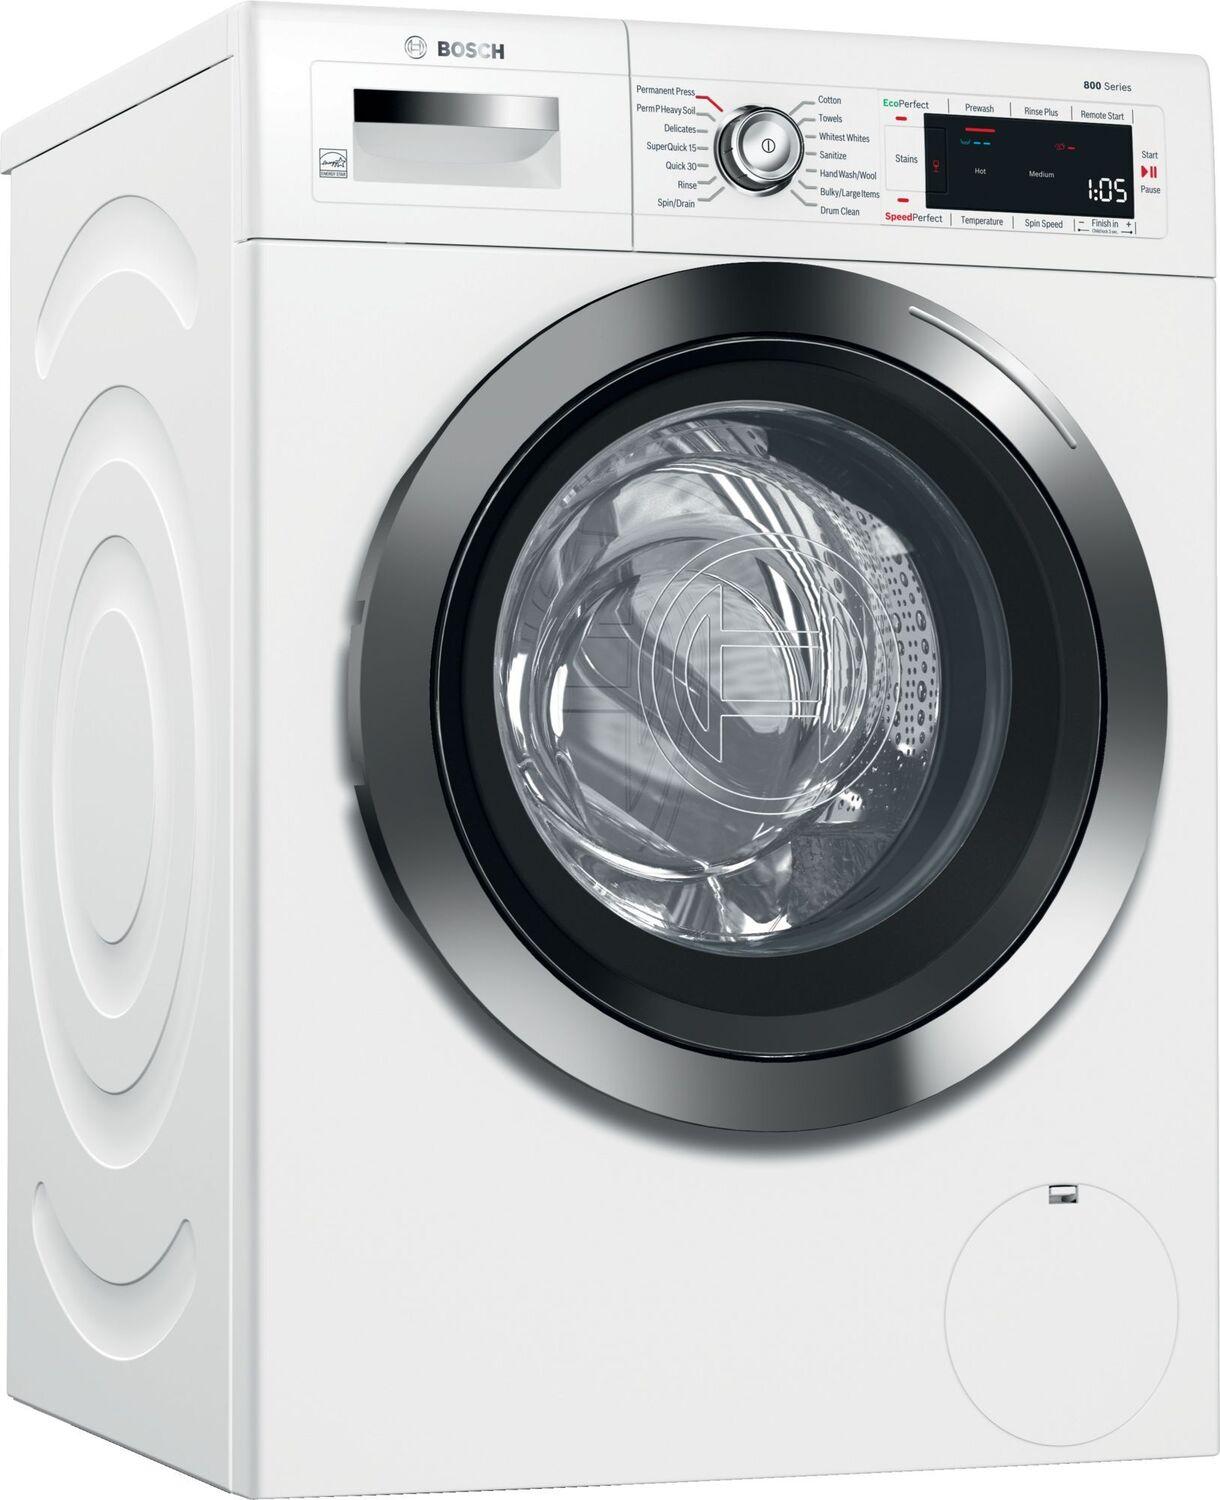 Bosch 800 Series Compact Washer 1400 rpm WAW285H2UC